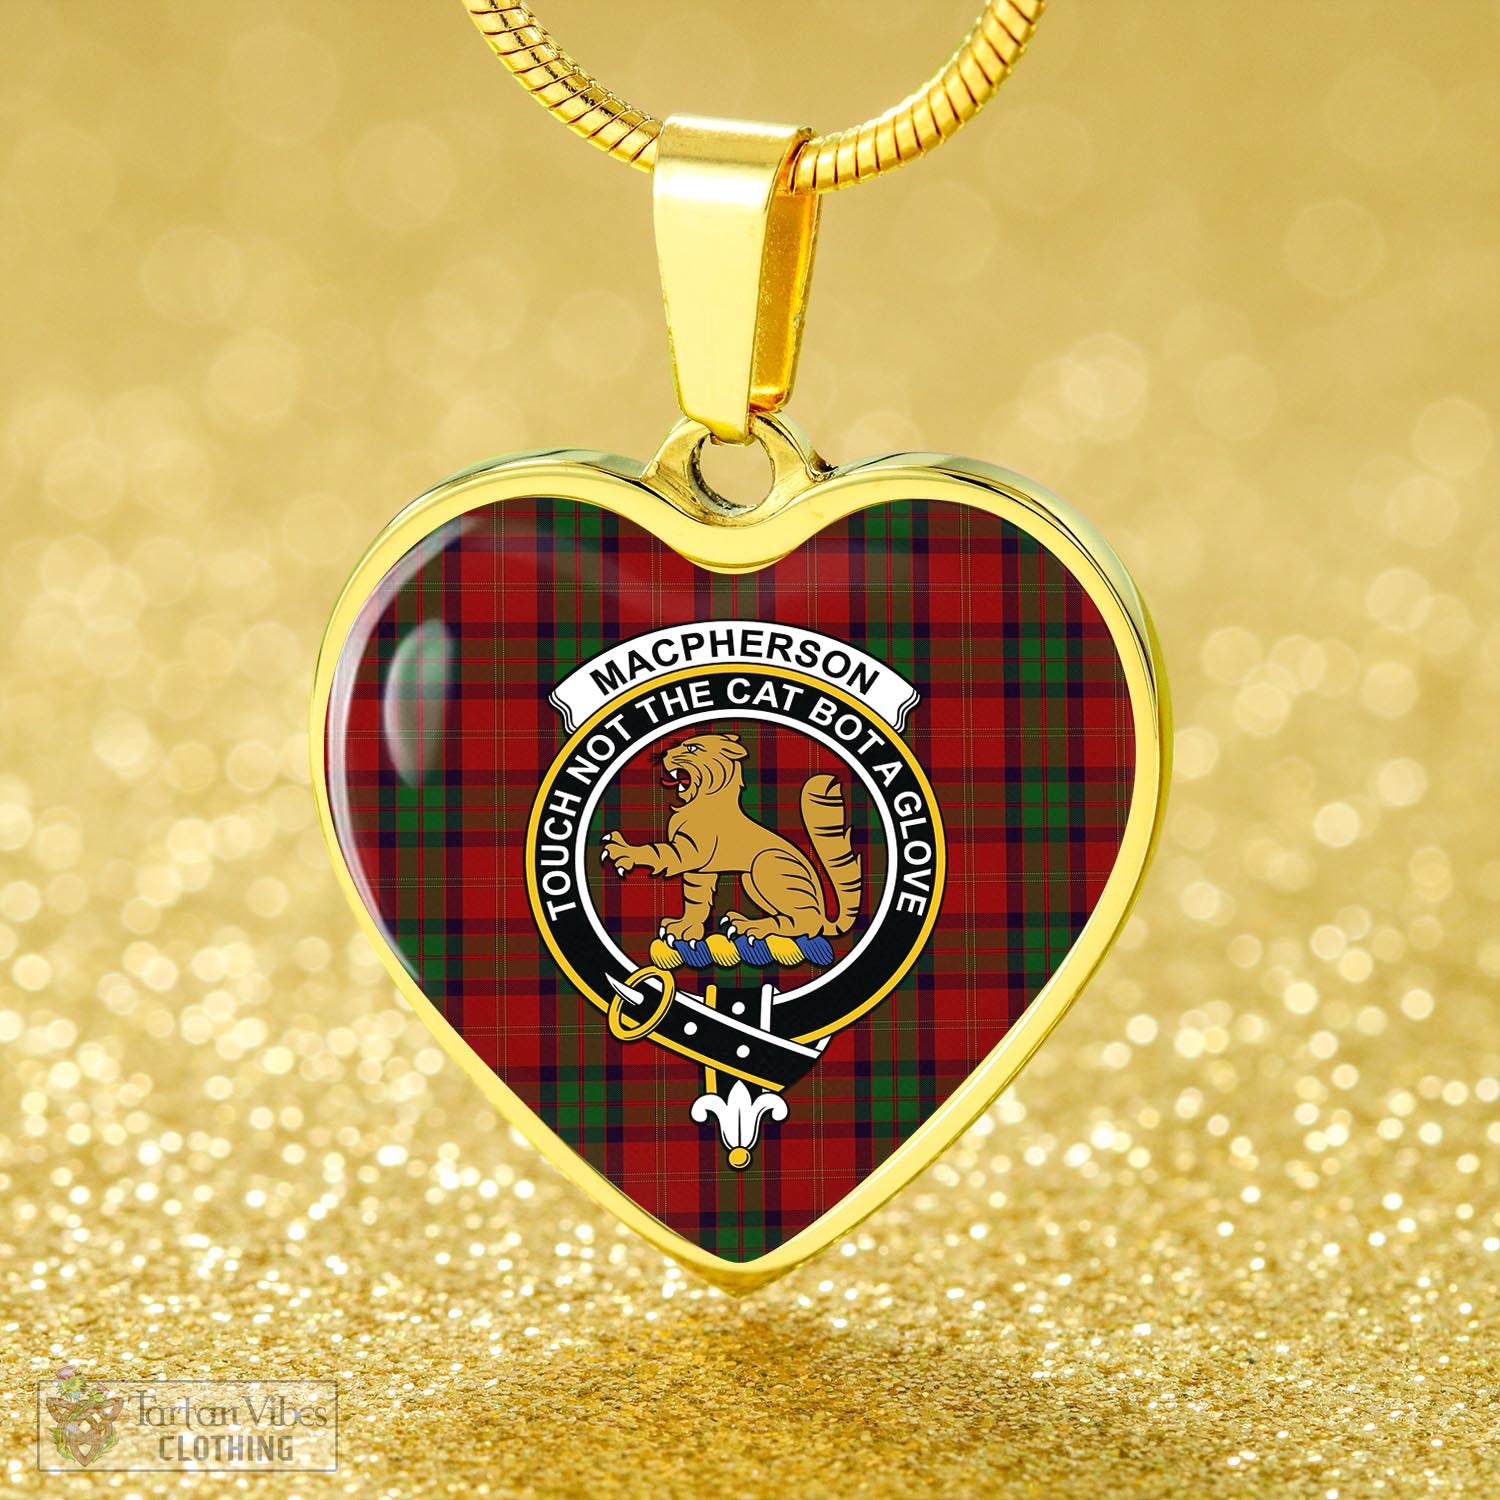 Tartan Vibes Clothing MacPherson of Cluny Tartan Heart Necklace with Family Crest